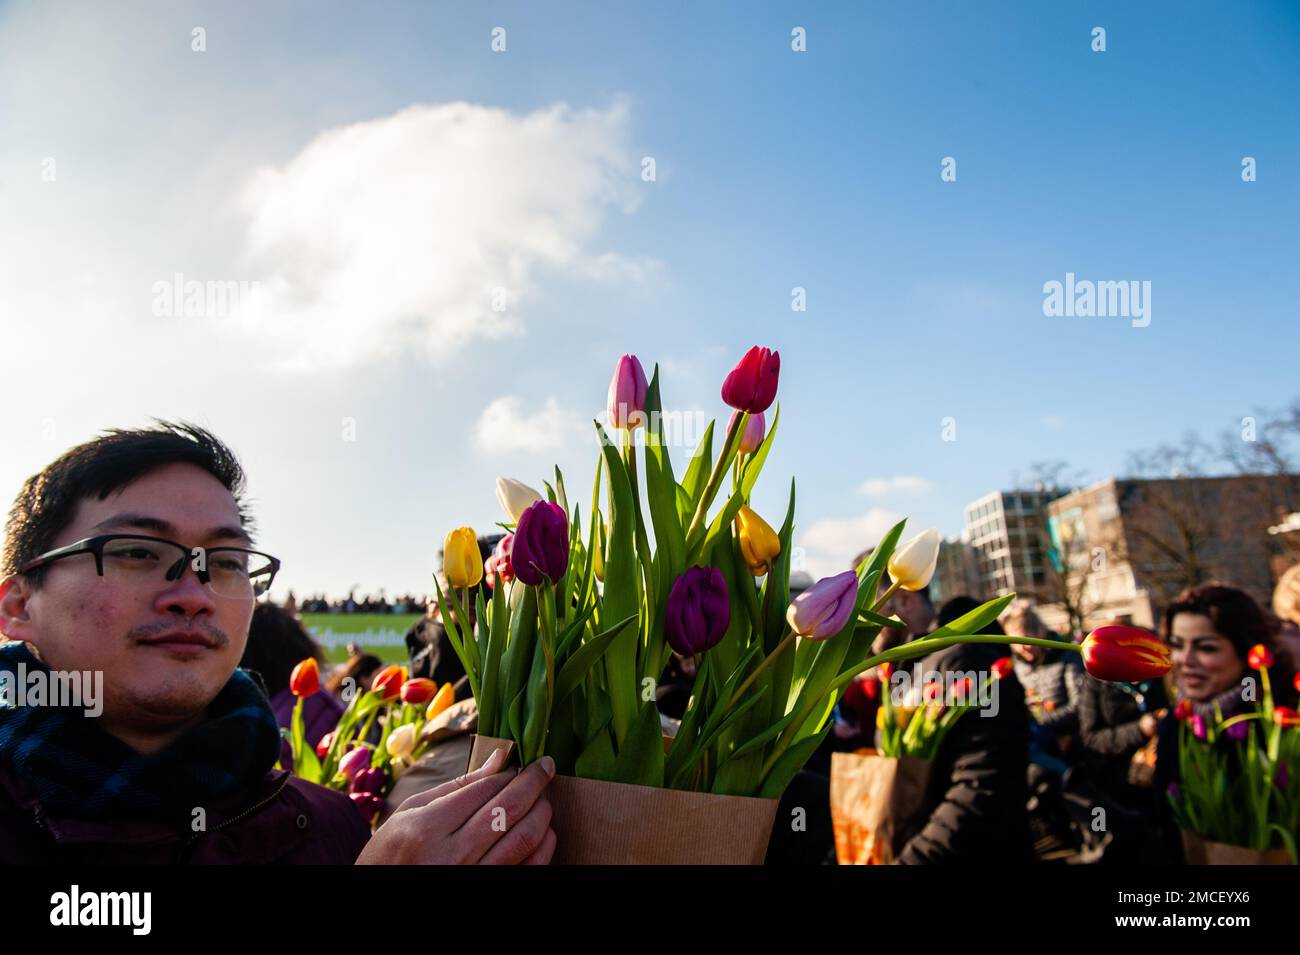 A man seen walking with a bag full of tulips. Each year on the 3rd Saturday of January, the National Tulip Day is celebrated in Amsterdam. Dutch tulip growers built a huge picking garden with more than 200,000 colorful tulips at the Museumplein in Amsterdam. Visitors are allowed to pick tulips for free. The event was opened by Olympic skating champion, Irene Schouten. Prior to the opening, she christened a new tulip: Tulipa 'Dutch Pearl' as a reference to the world - famous painting 'The girl with a pearl earring' by Johannes Vermeer. (Photo by Ana Fernandez/SOPA Images/Sipa USA) Stock Photo